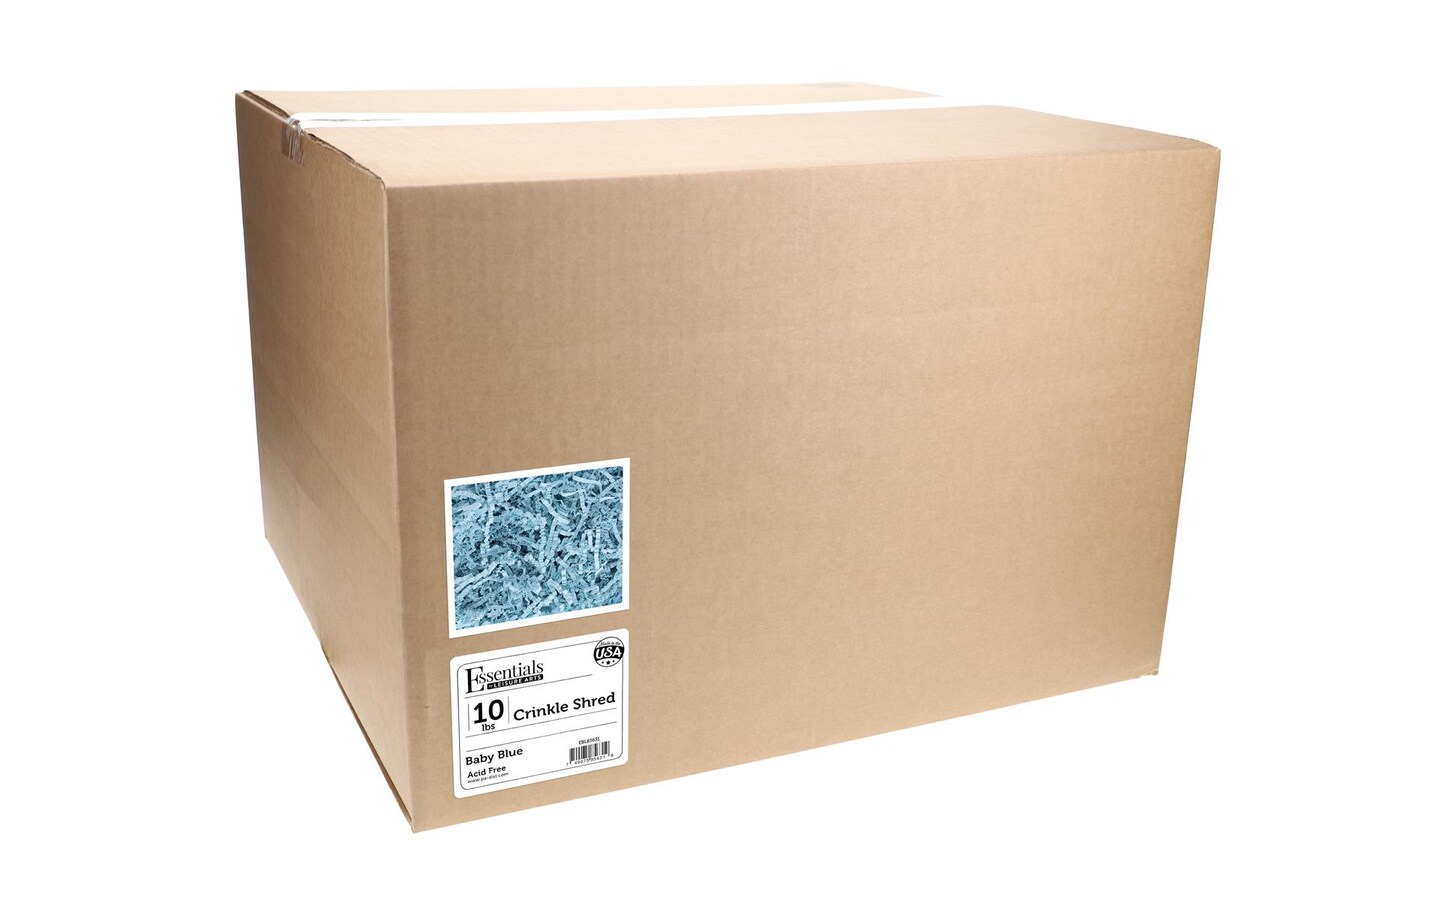 Essentials by Leisure Arts Crinkle Shred Box, Baby Blue, 10lbs Shredded Paper Filler, Crinkle Cut Paper Shred Filler, Box Filler, Shredded Paper for Gift Box, Paper Crinkle Filler, Box Filling